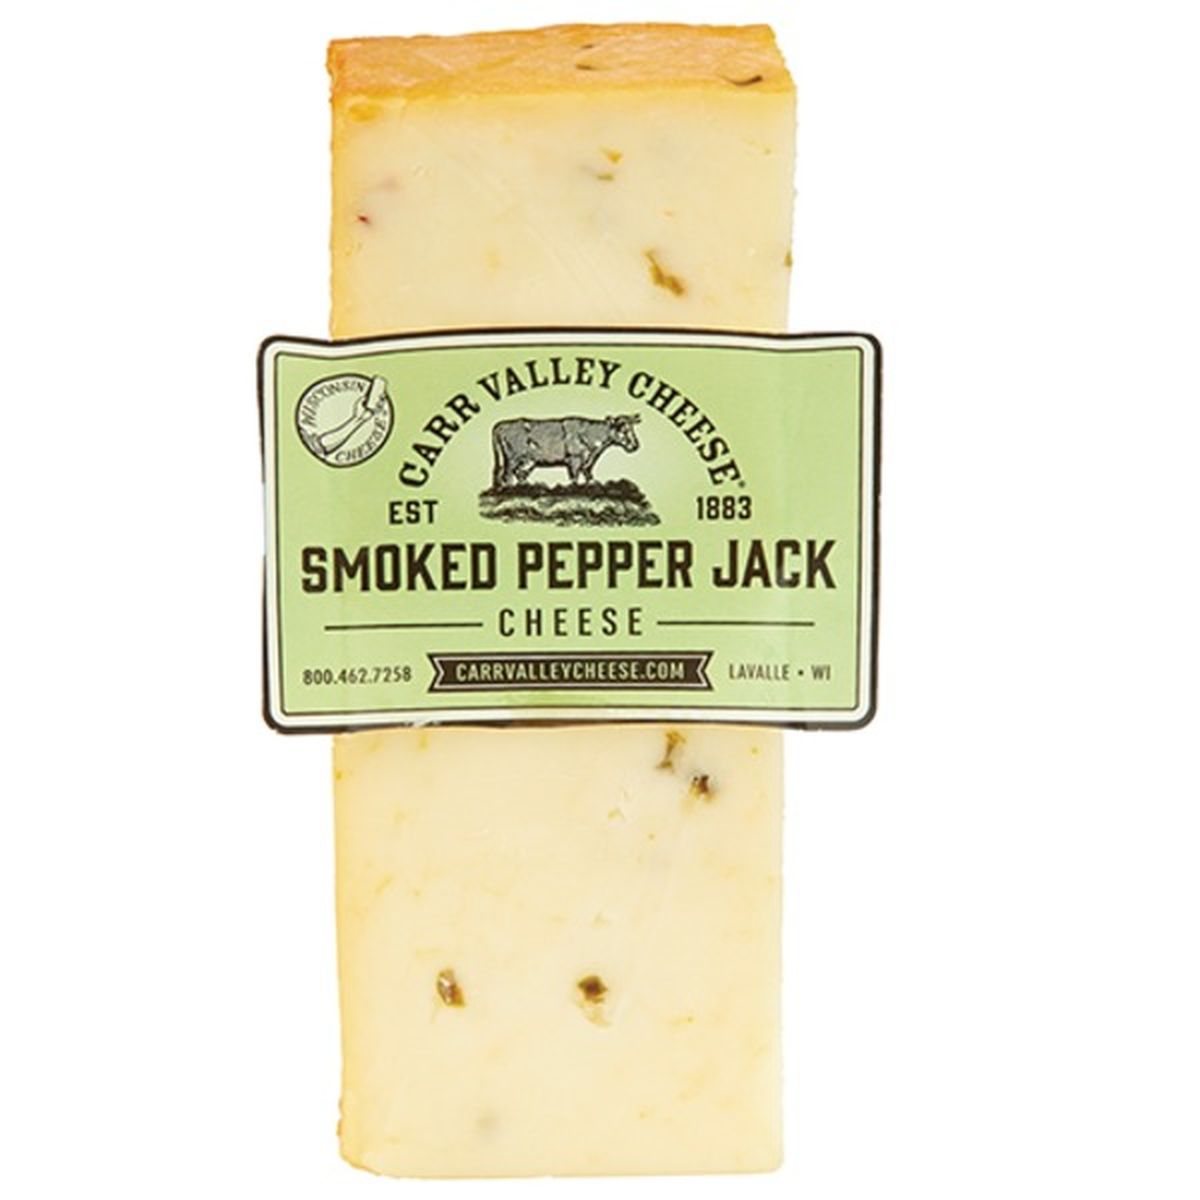 Calories in Carr Valley Cheese Smoked Pepper Jack Cheese